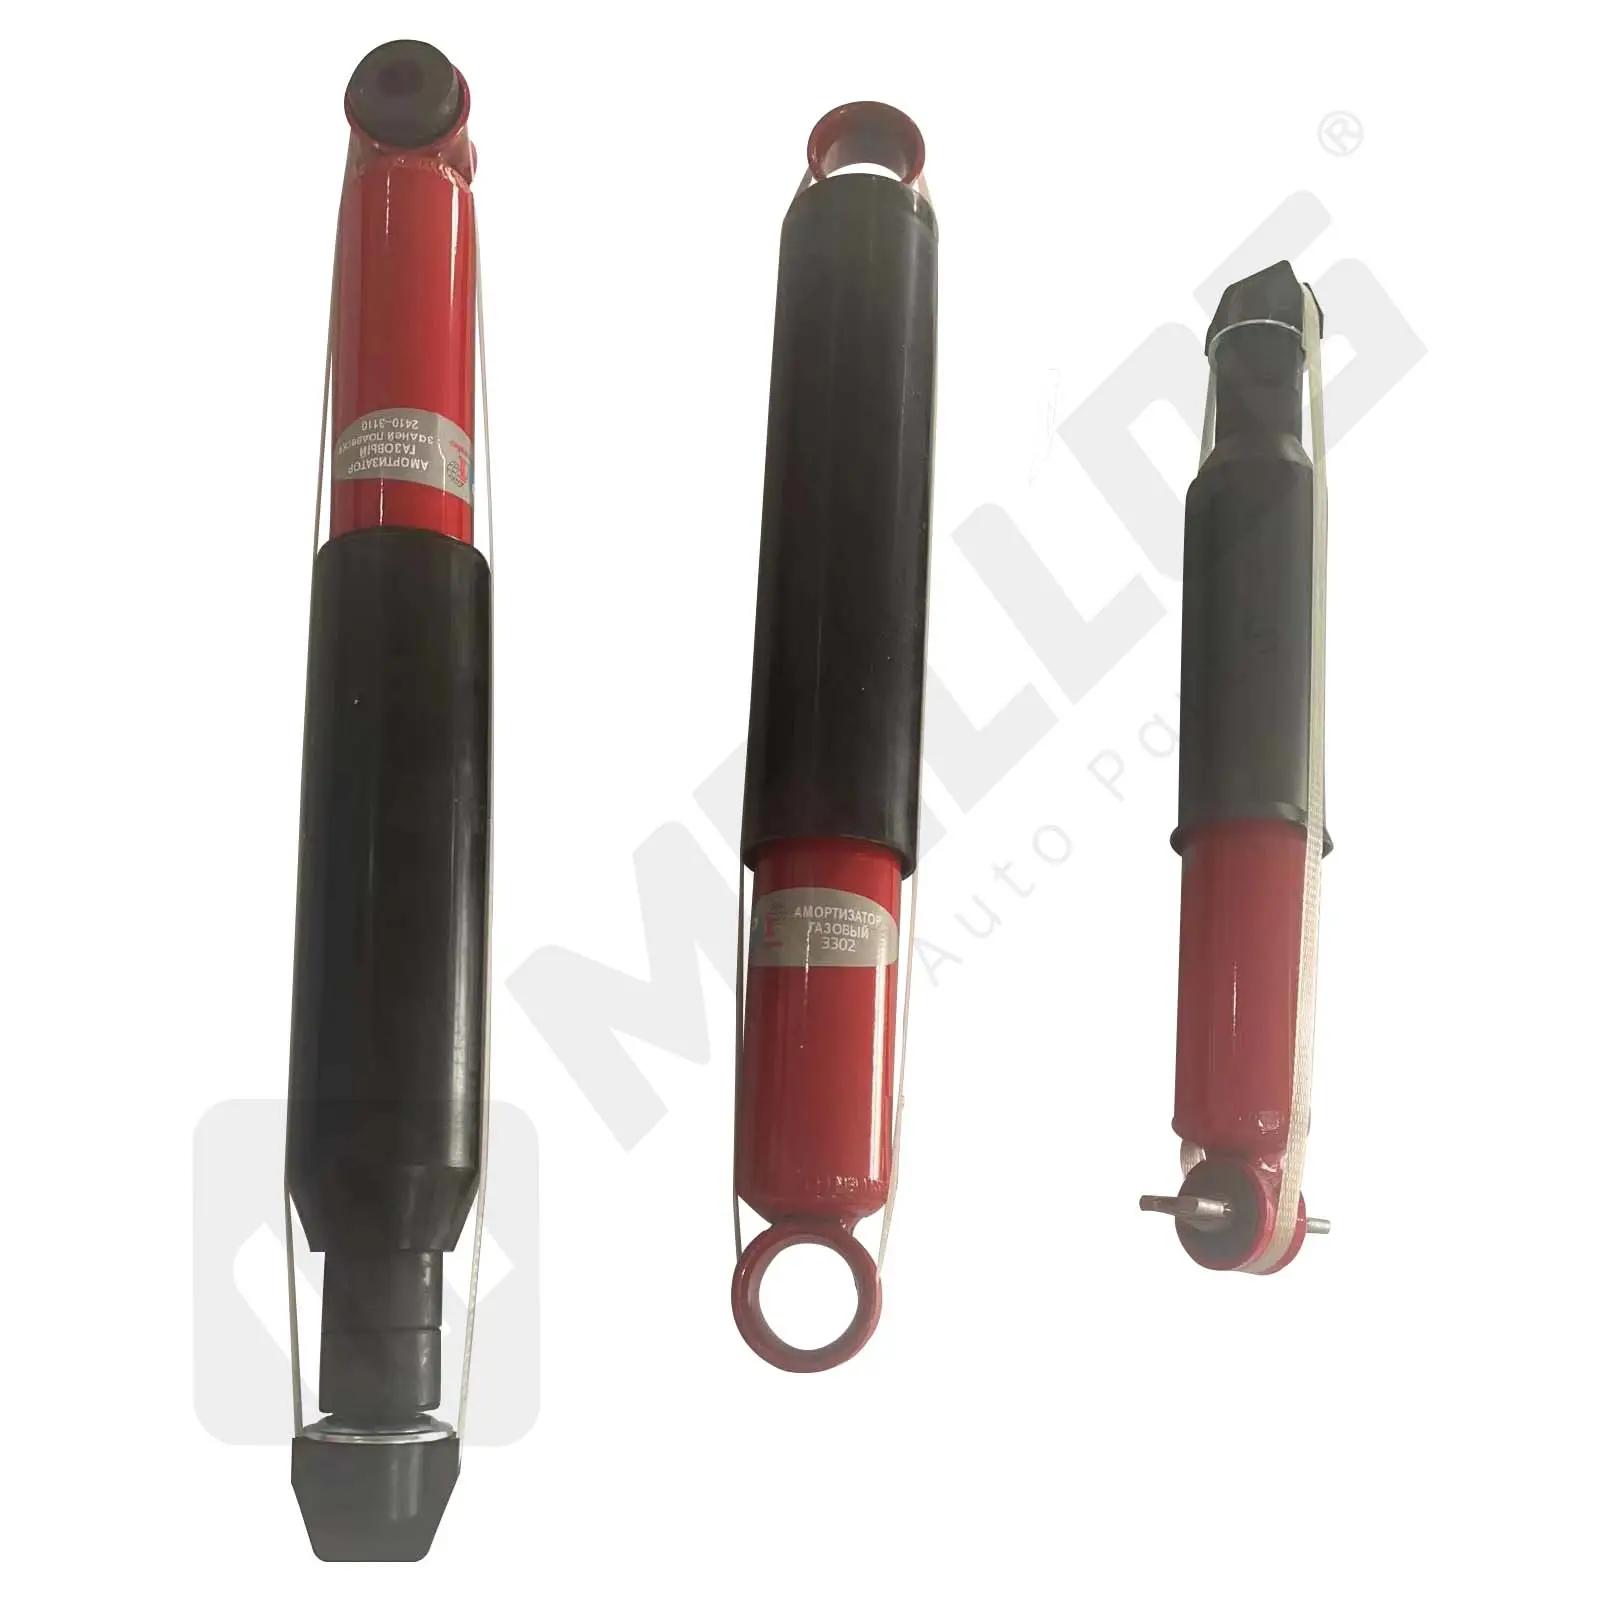 Exquisite structure manufacturing car suspension shock absorber 2410-3110 for GAZ